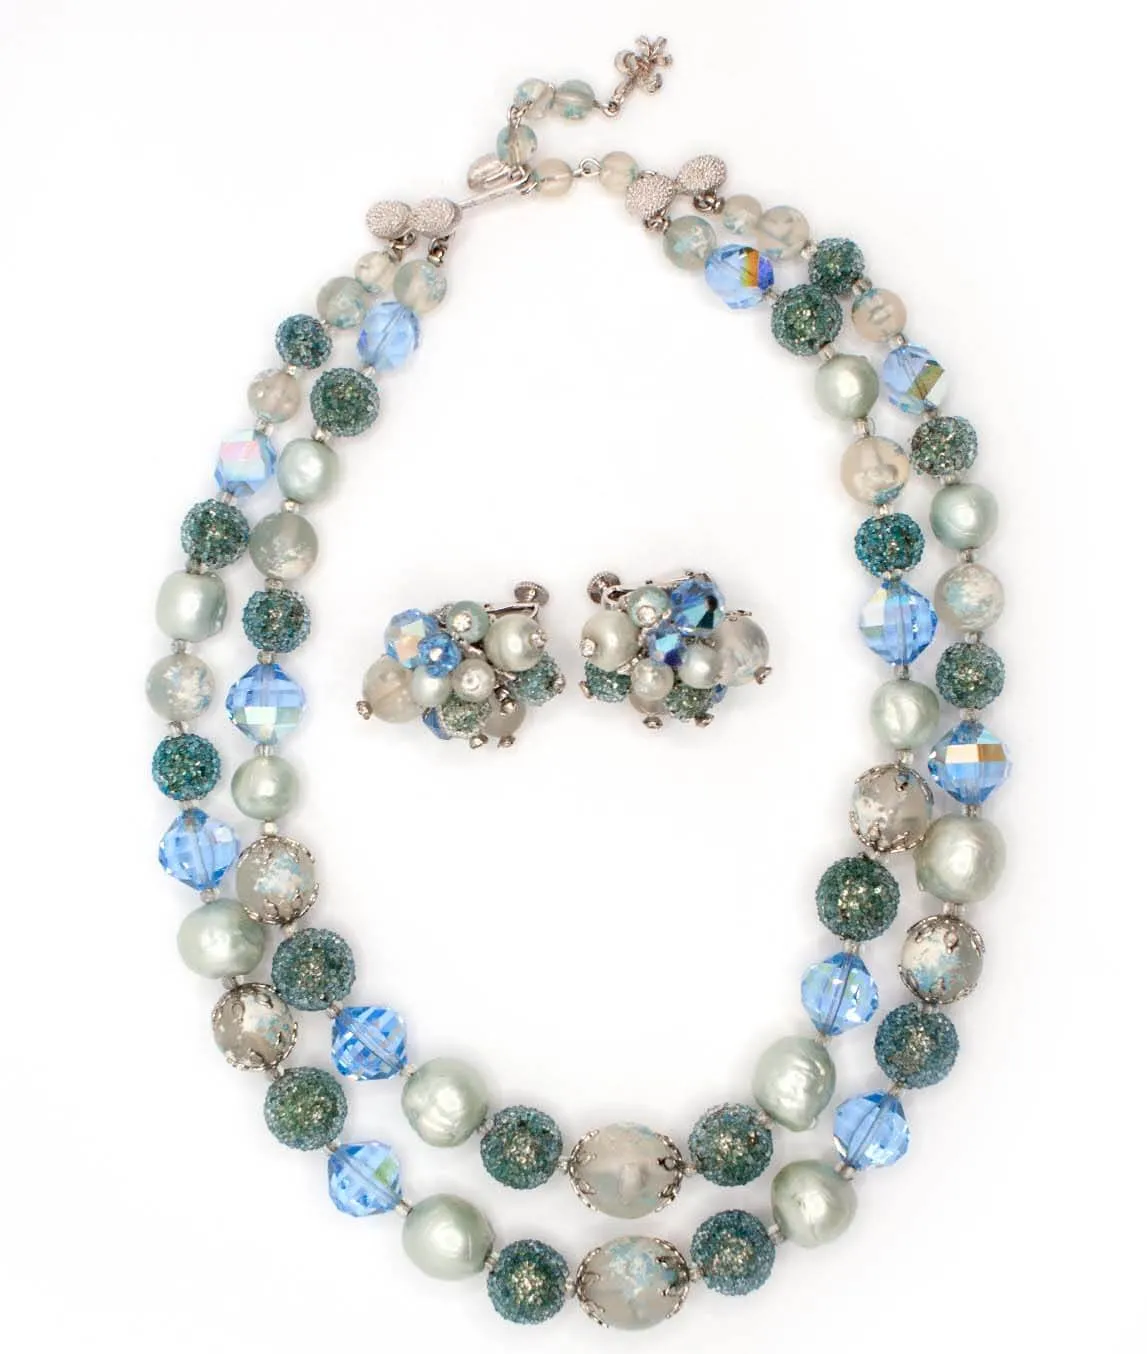 Vendôme Necklace and Earrings blue green and aqua beads